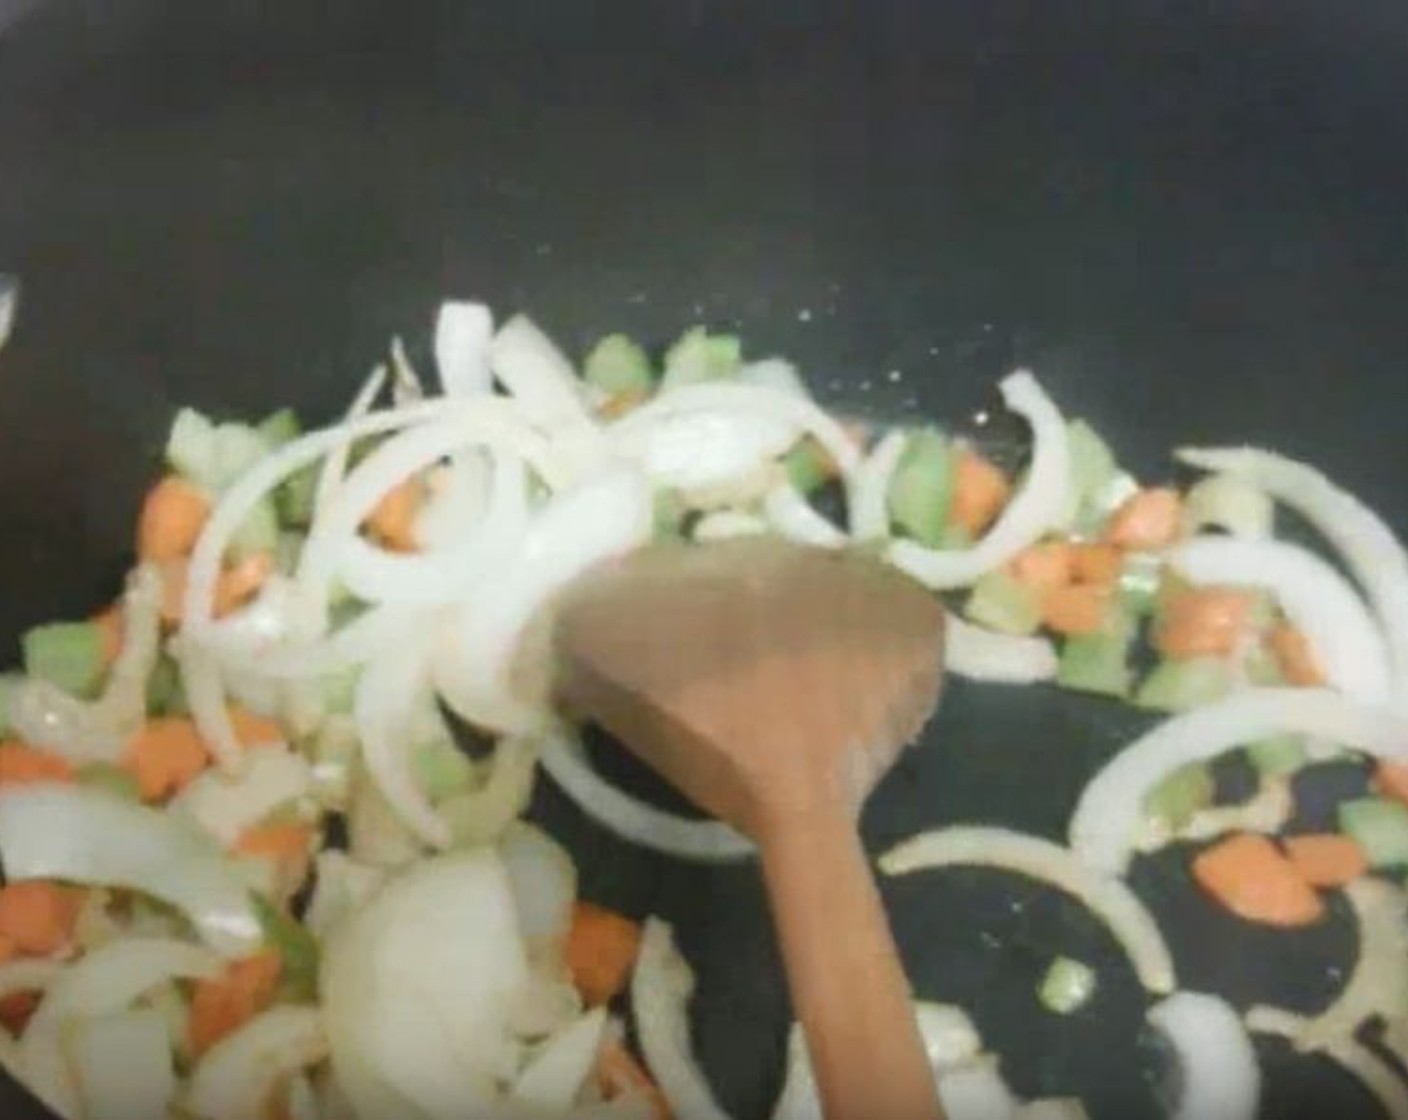 step 1 In a pot, heat the Butter (2 Tbsp). Once melted, add the Celery (2 stalks), Carrot (1), and Onion (1). Cook until onion begins to brown.